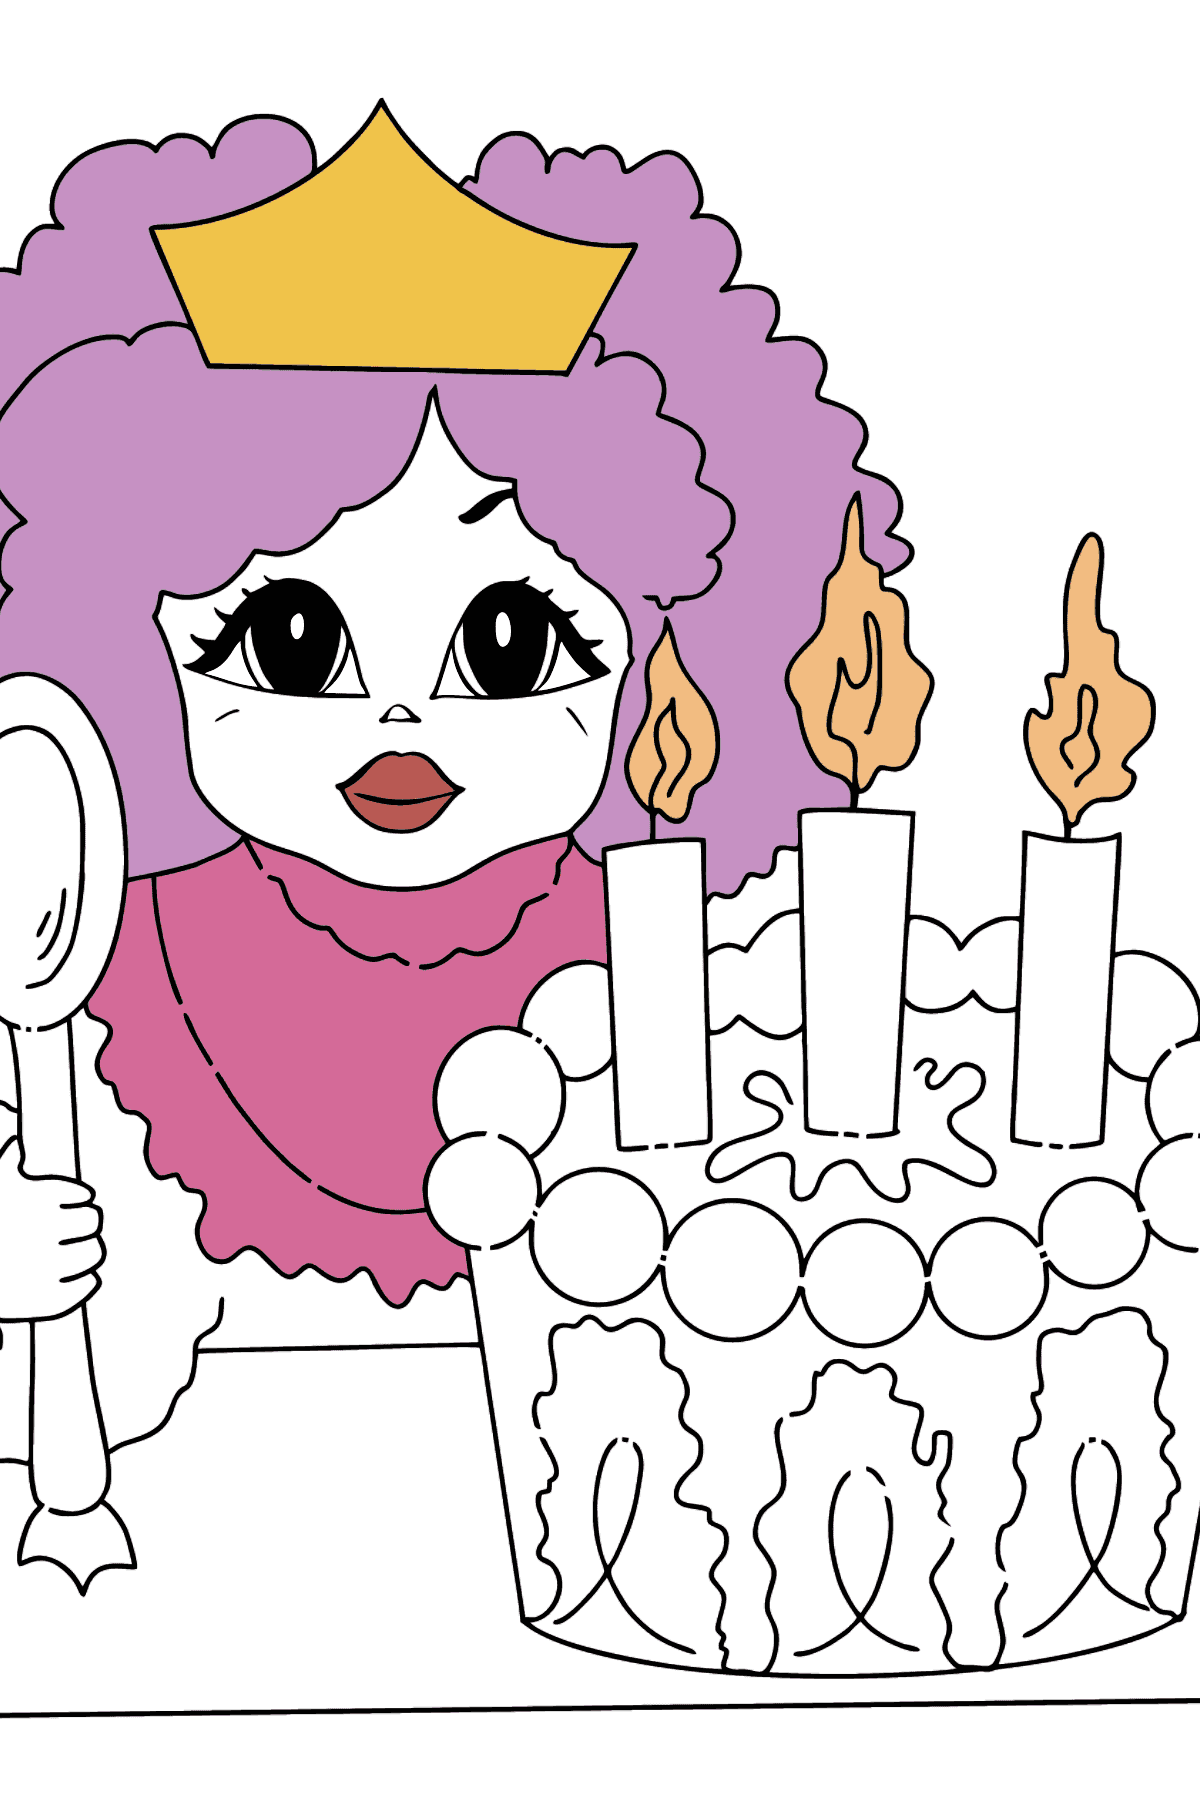 Coloring Page - A Princess with Cake - For Girls - Coloring Pages for Kids